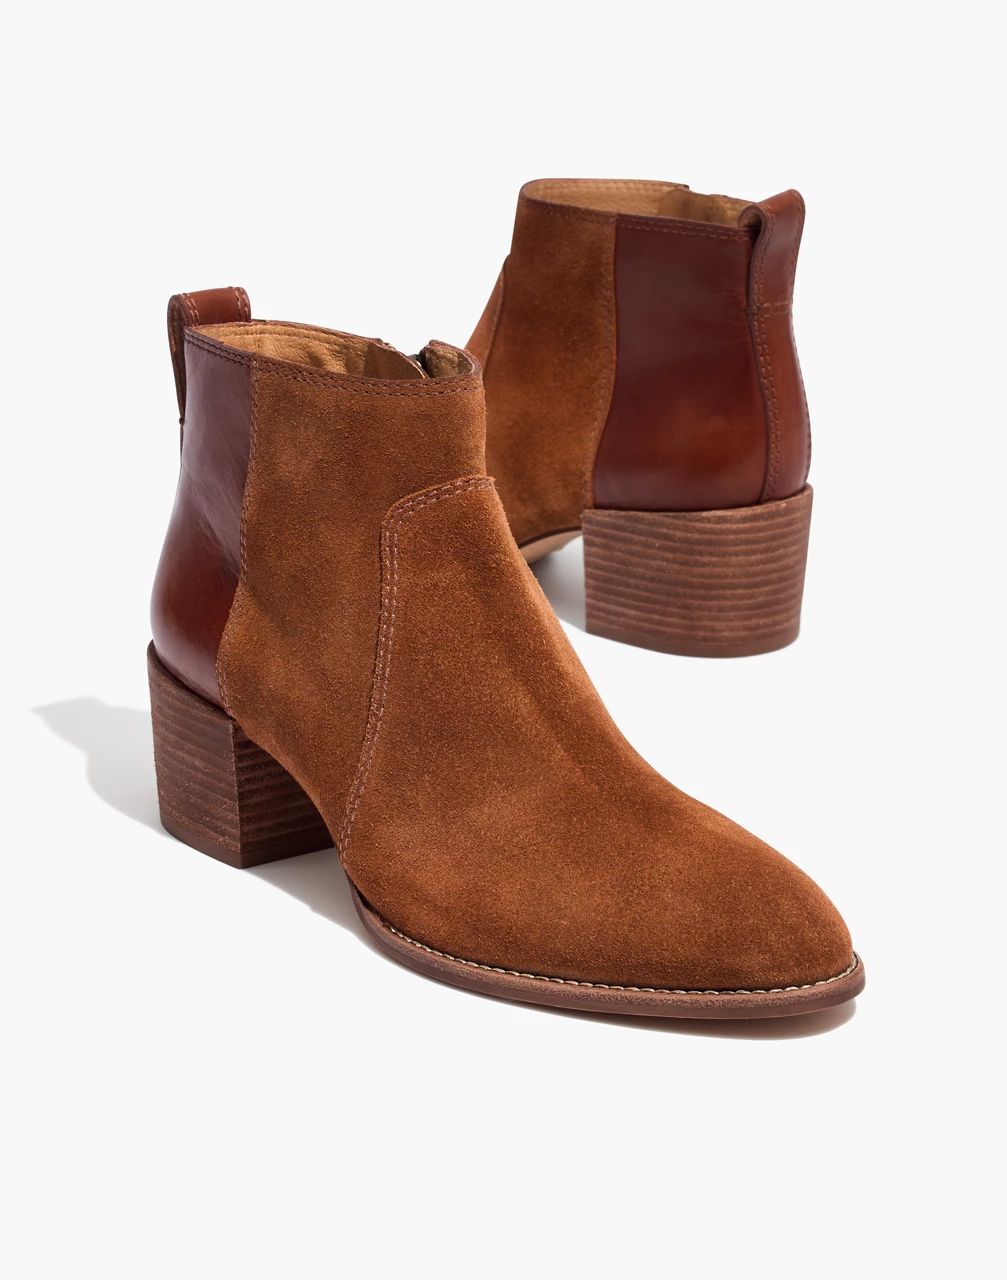 The Asher Boot in Suede and Leather | Madewell